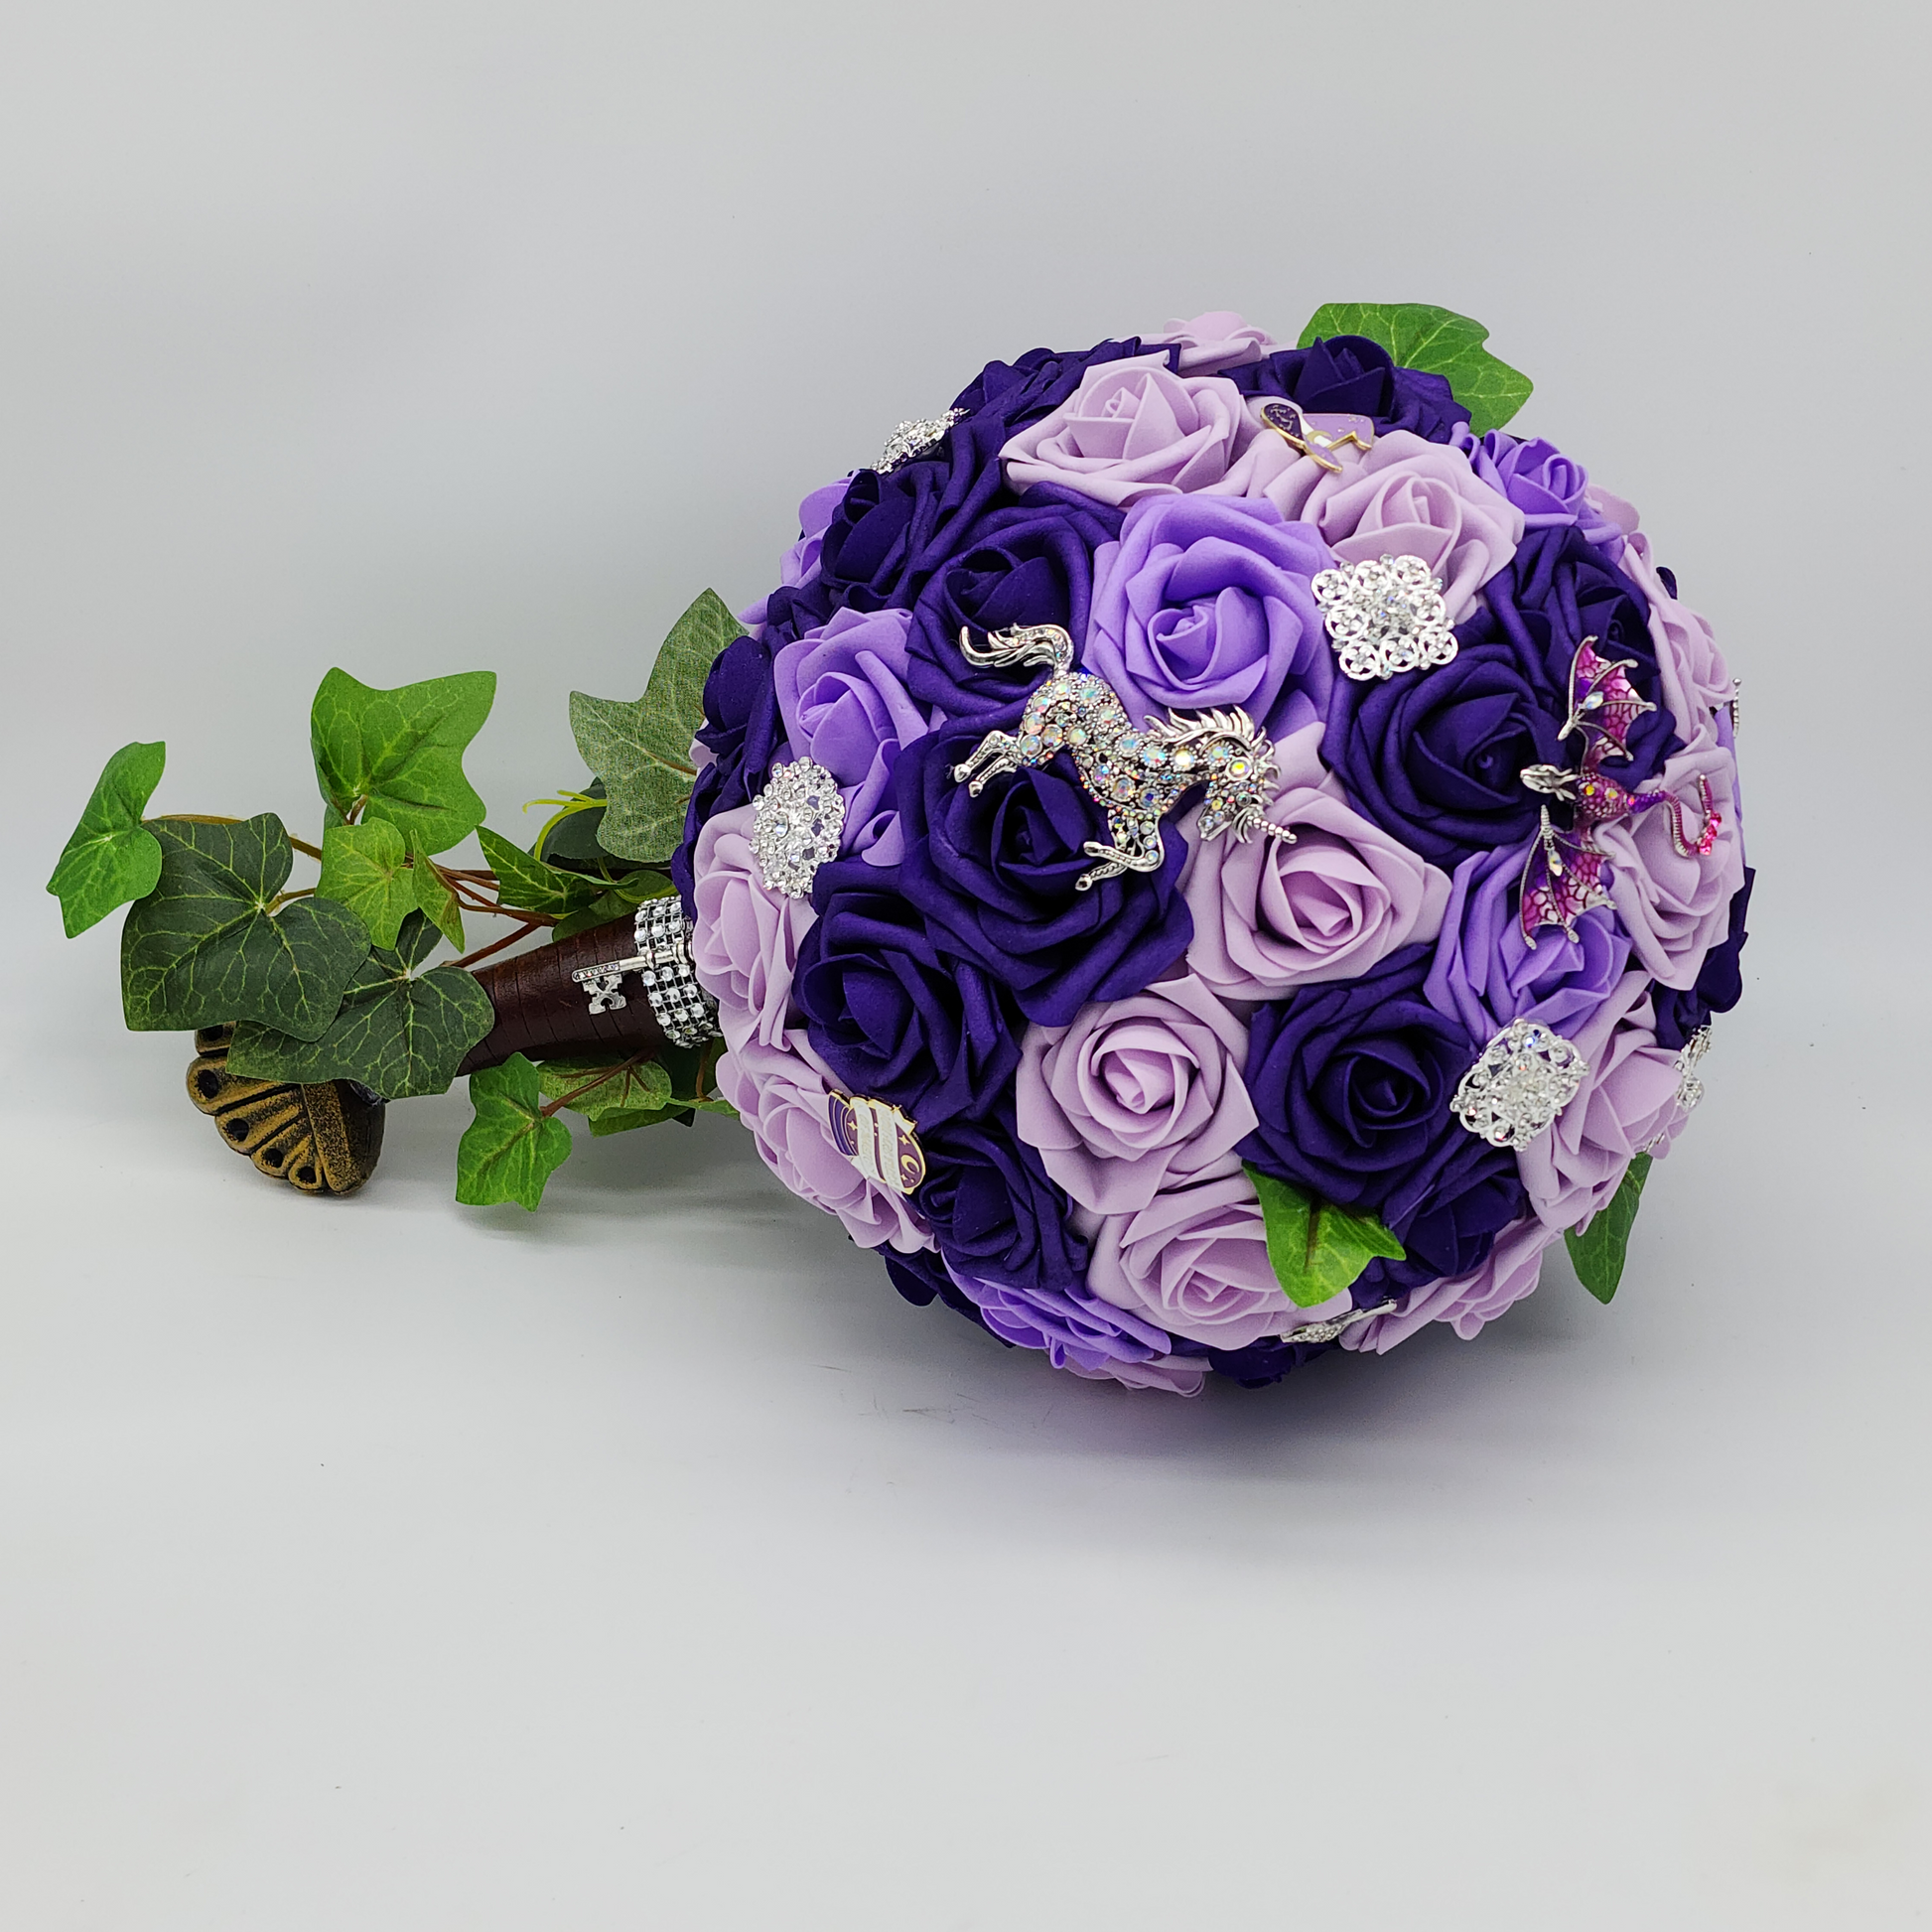 purple bridal bouquet with sword handle. fantasy brooches are scattered on bouquet. unicorns, dragons. ivy handle